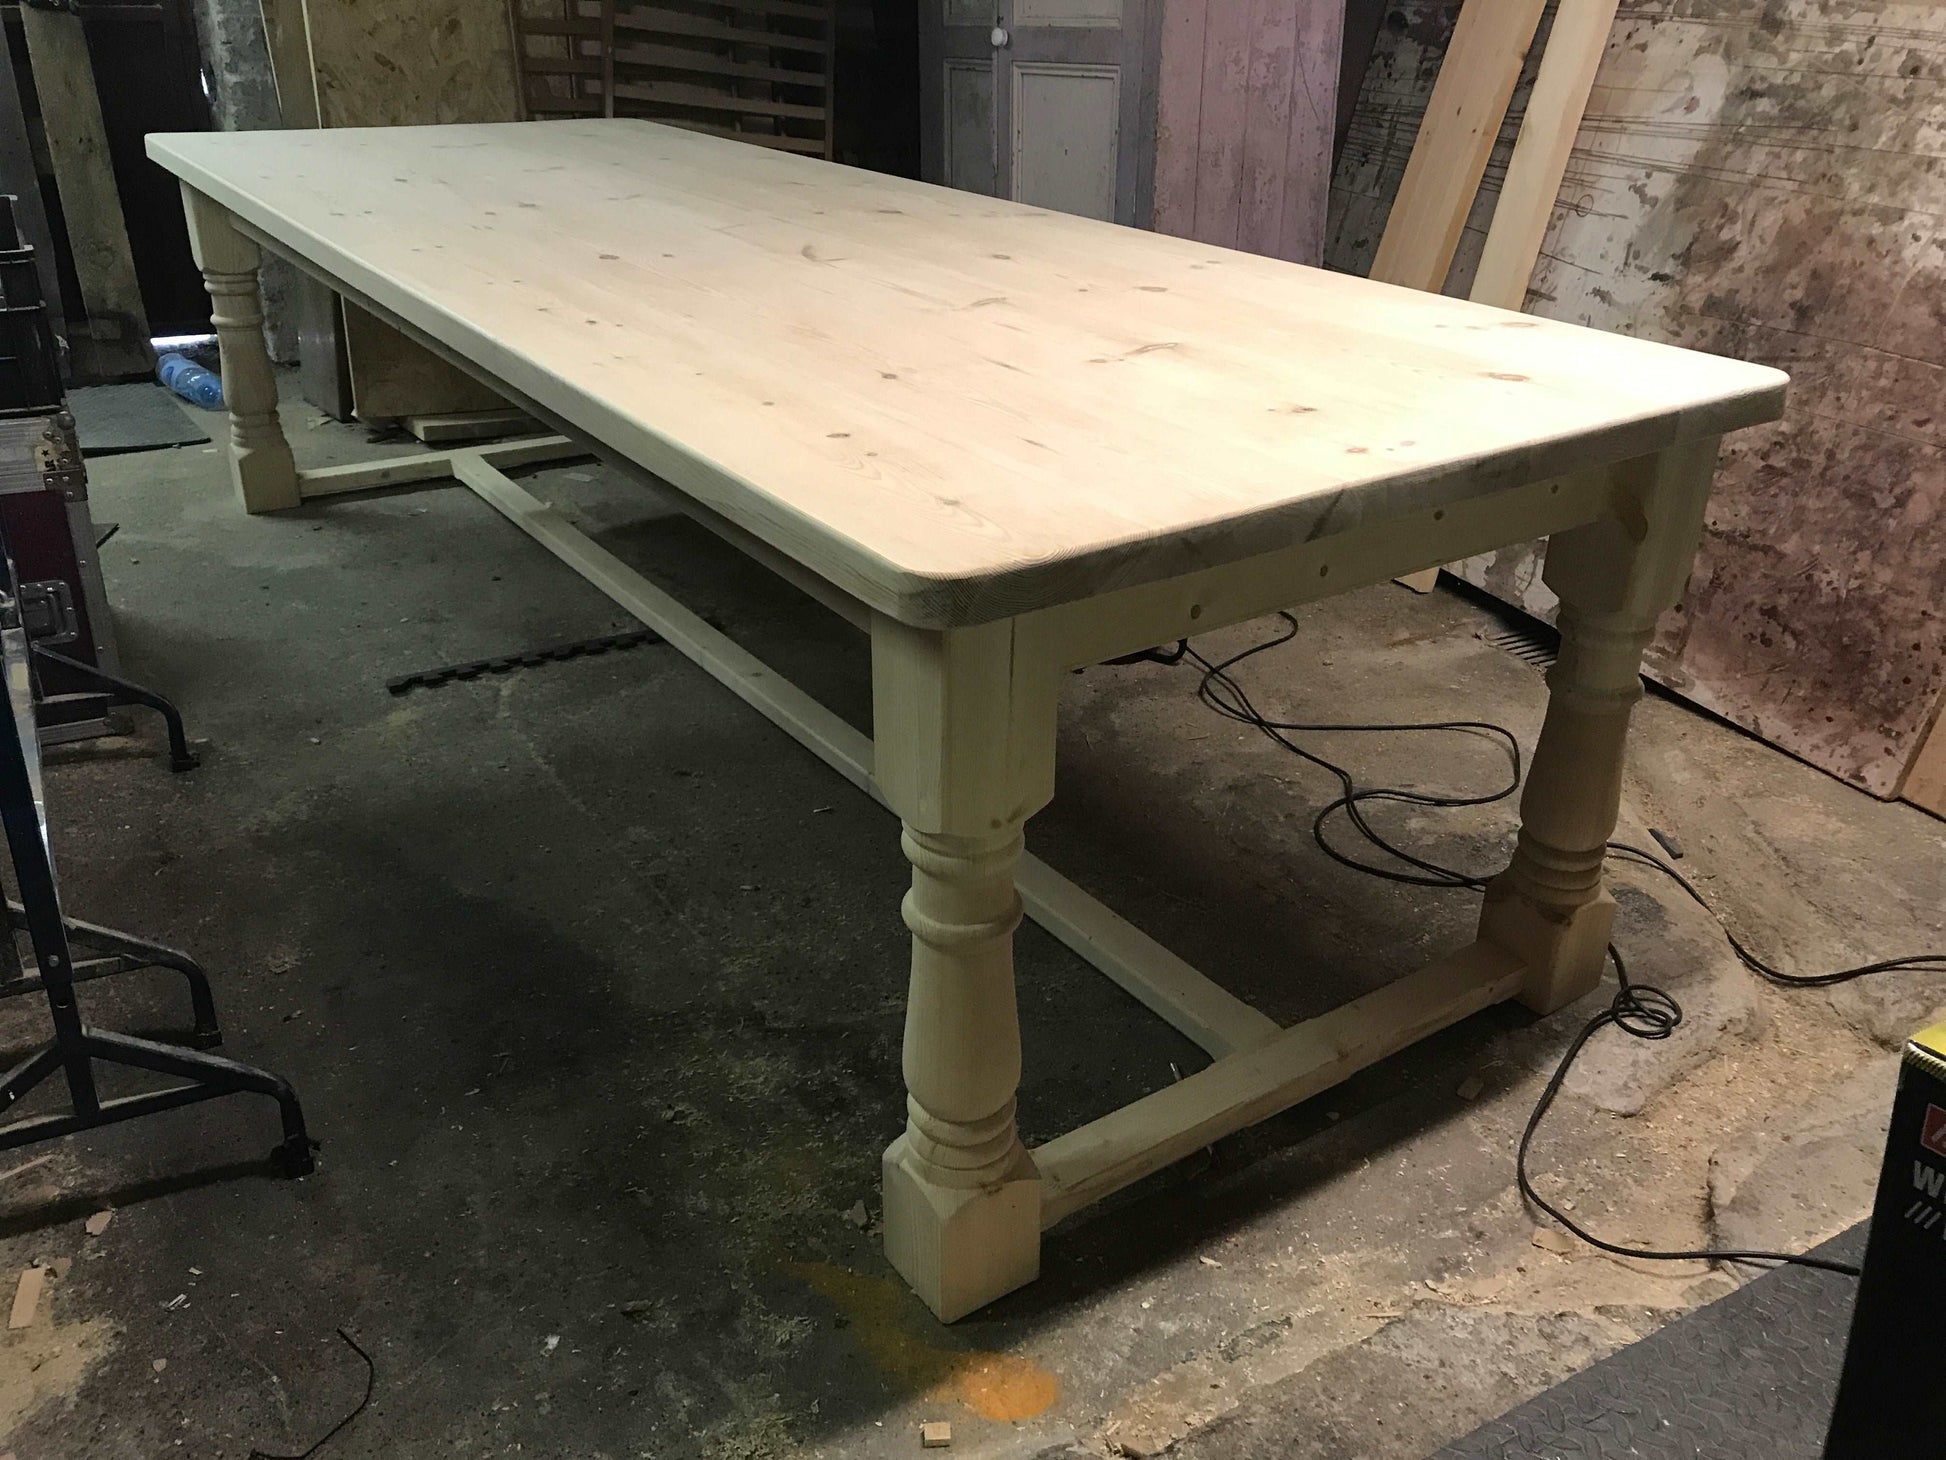 Premier Refectory Table